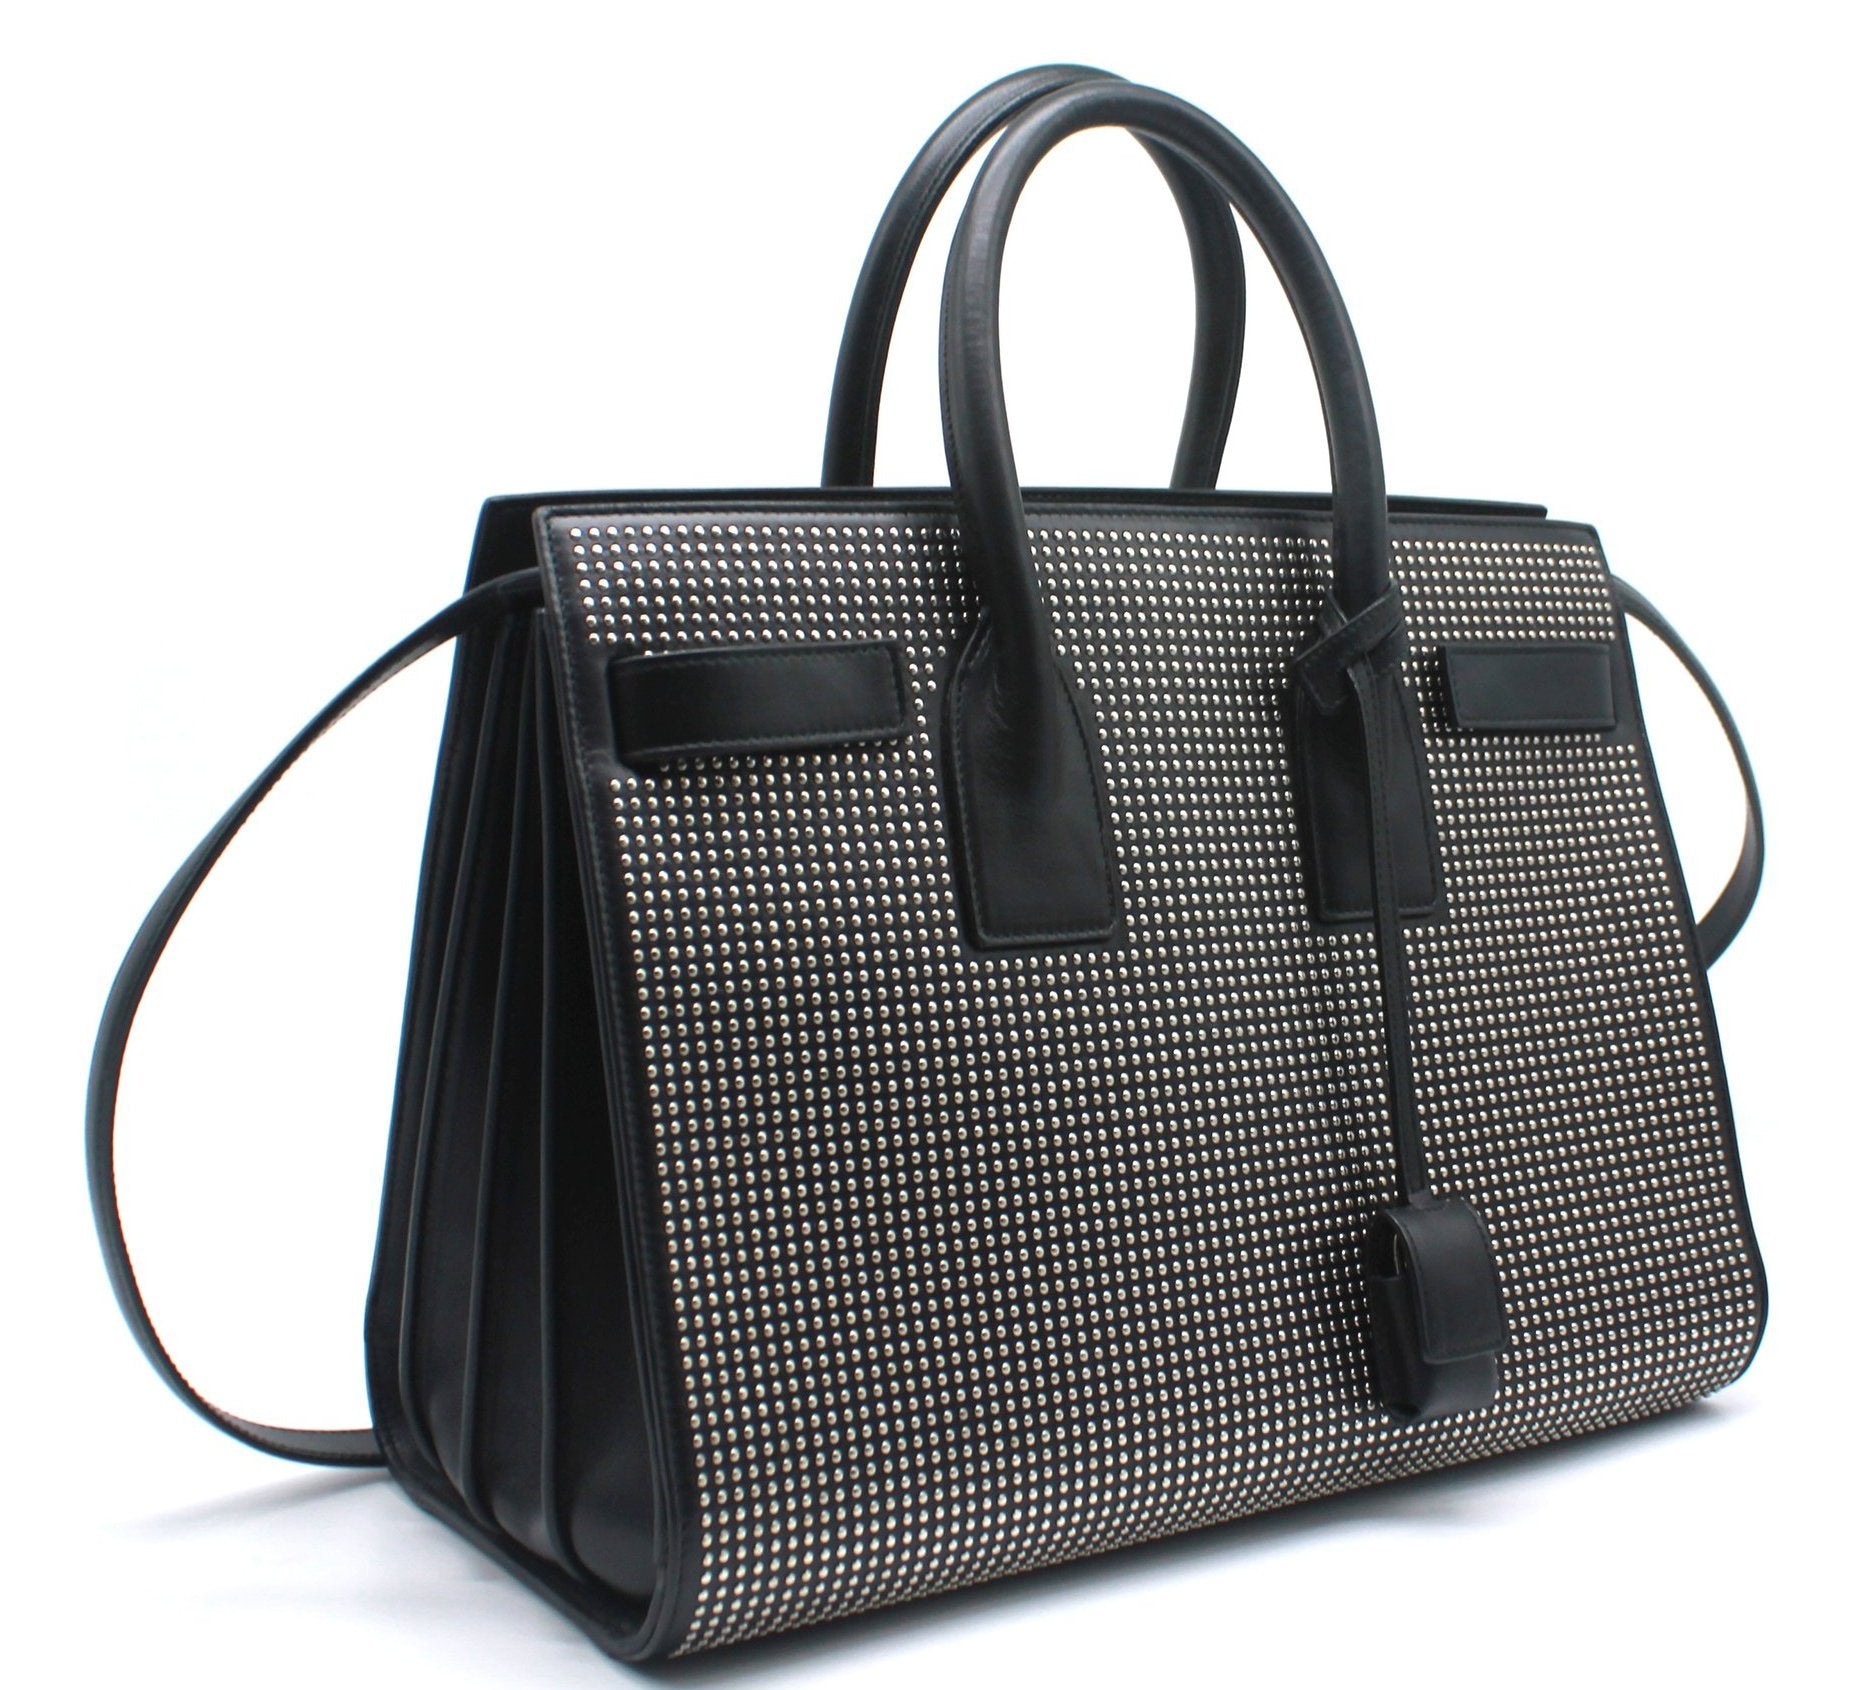 Saint Laurant Small Sac Du Jour in Black Leather with Silver Studs